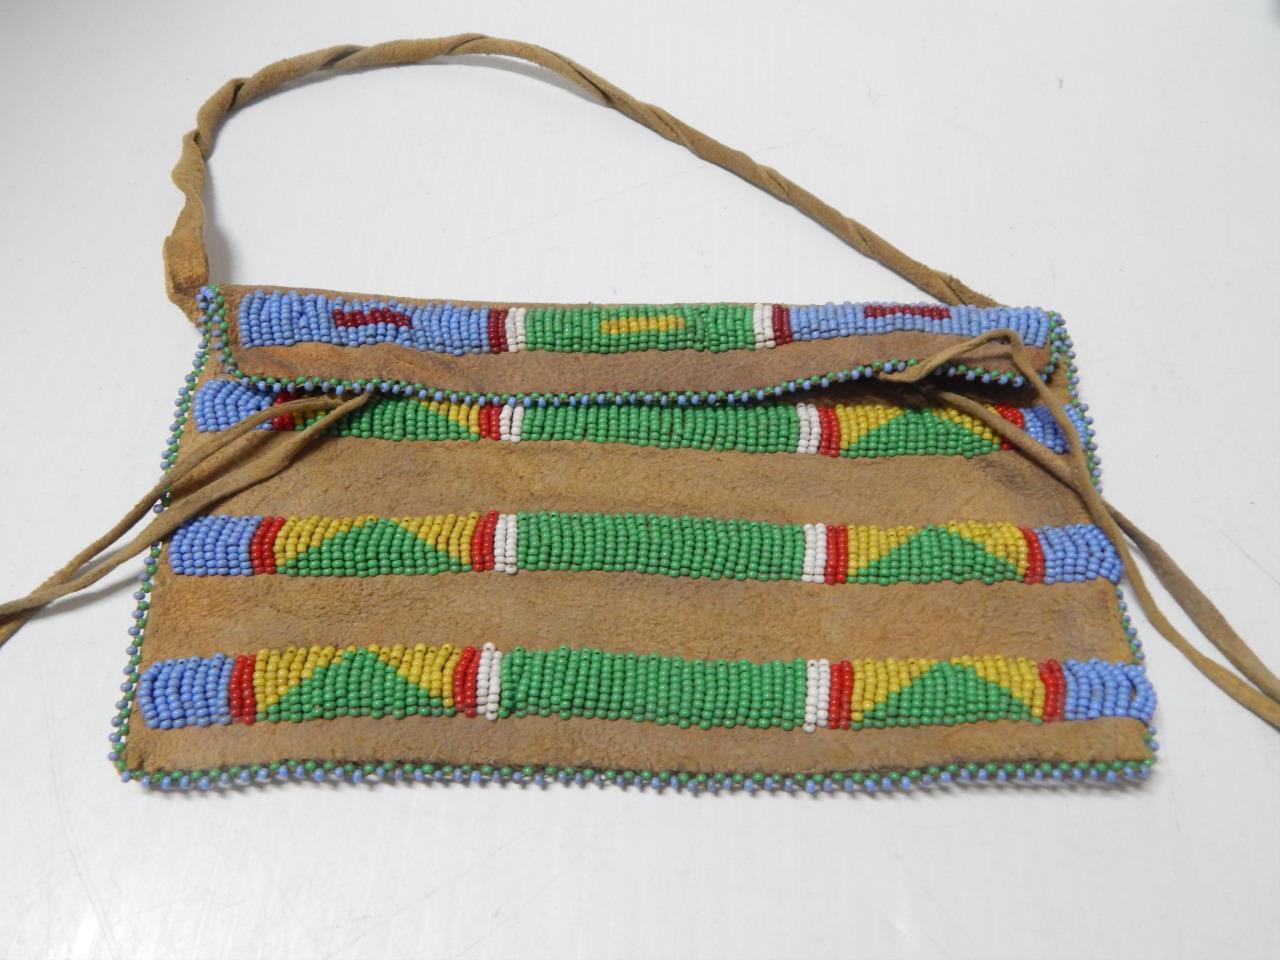 ANTIQUE PLAINS LAKOTA SIOUX INDIAN BEADED POSSIBLE BAG / POUCH NICE SIZE